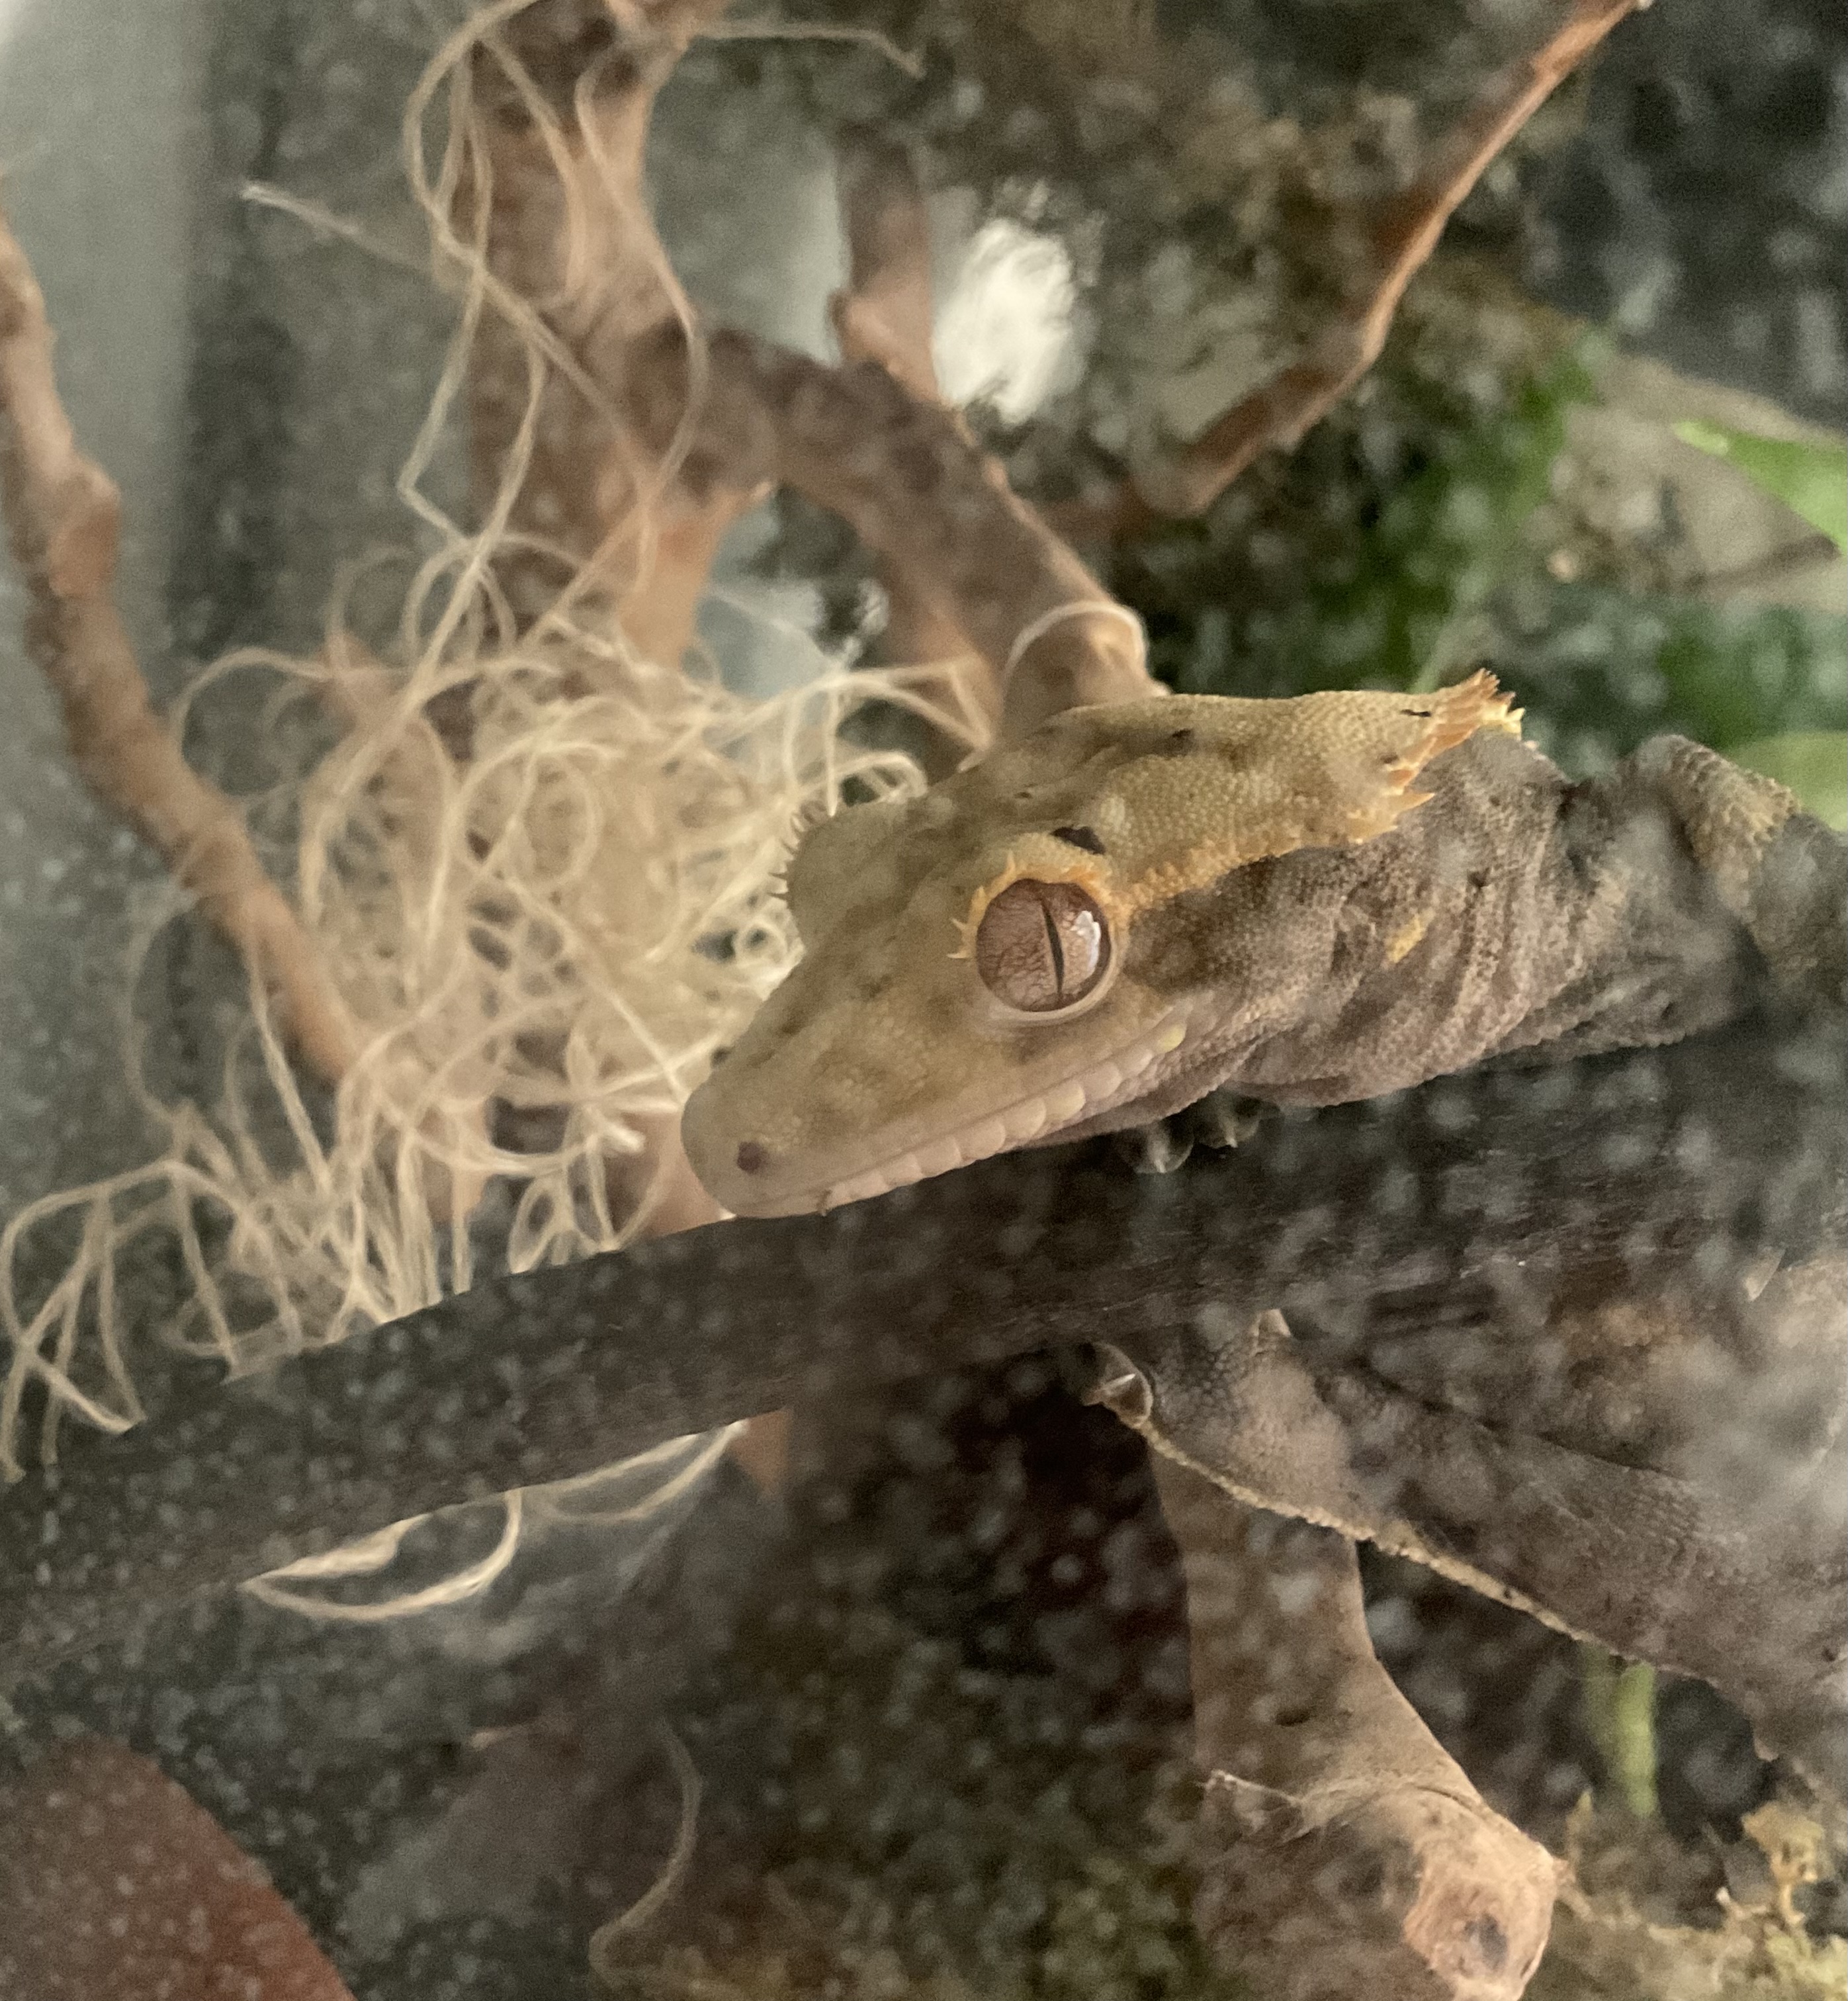 Just a picture of mango the crested gecko